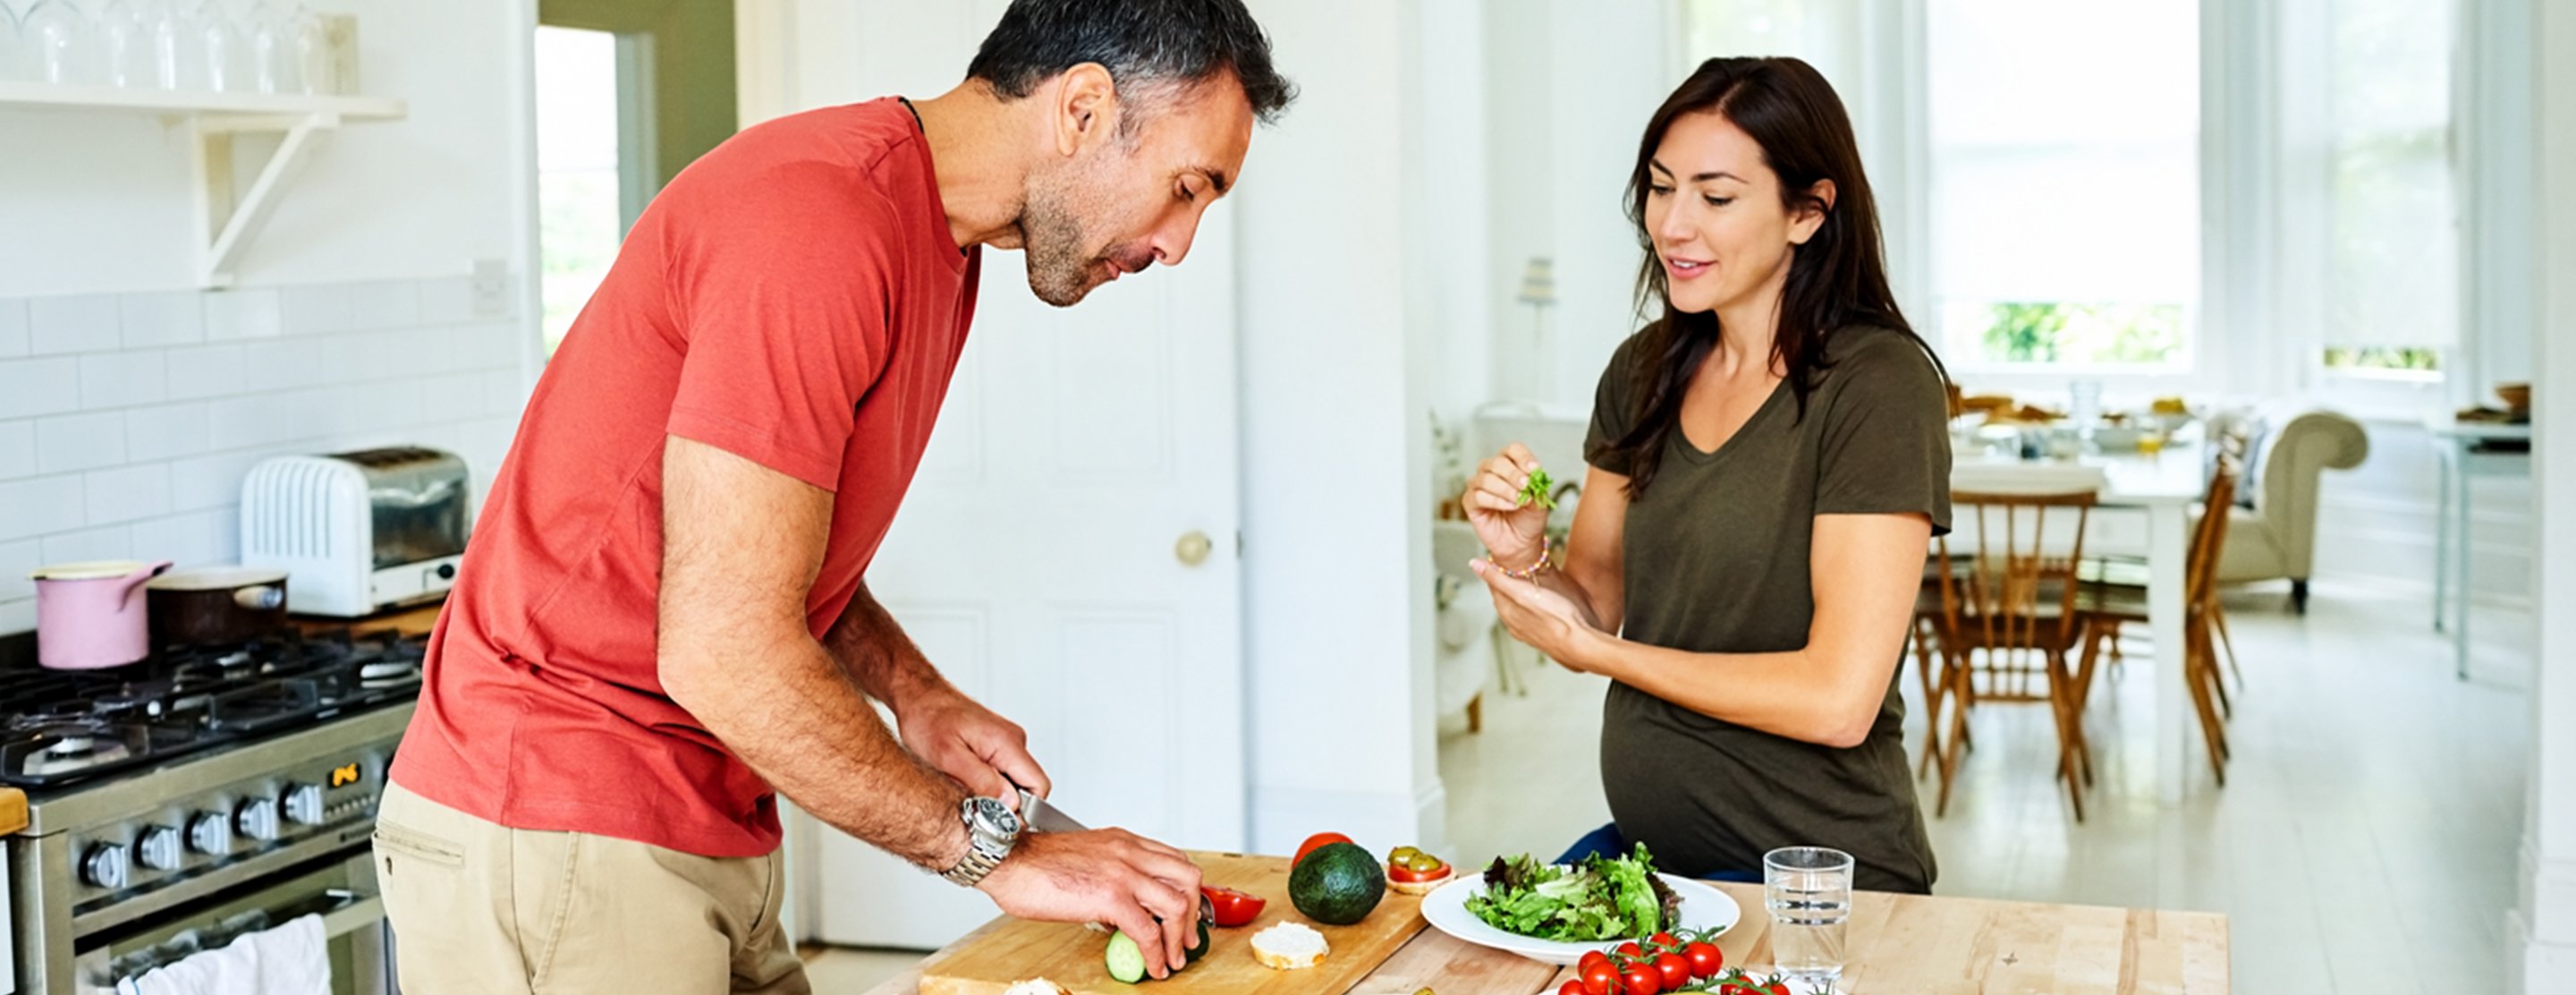 7 Pregnancy Nutrition Tips for Expectant Mothers